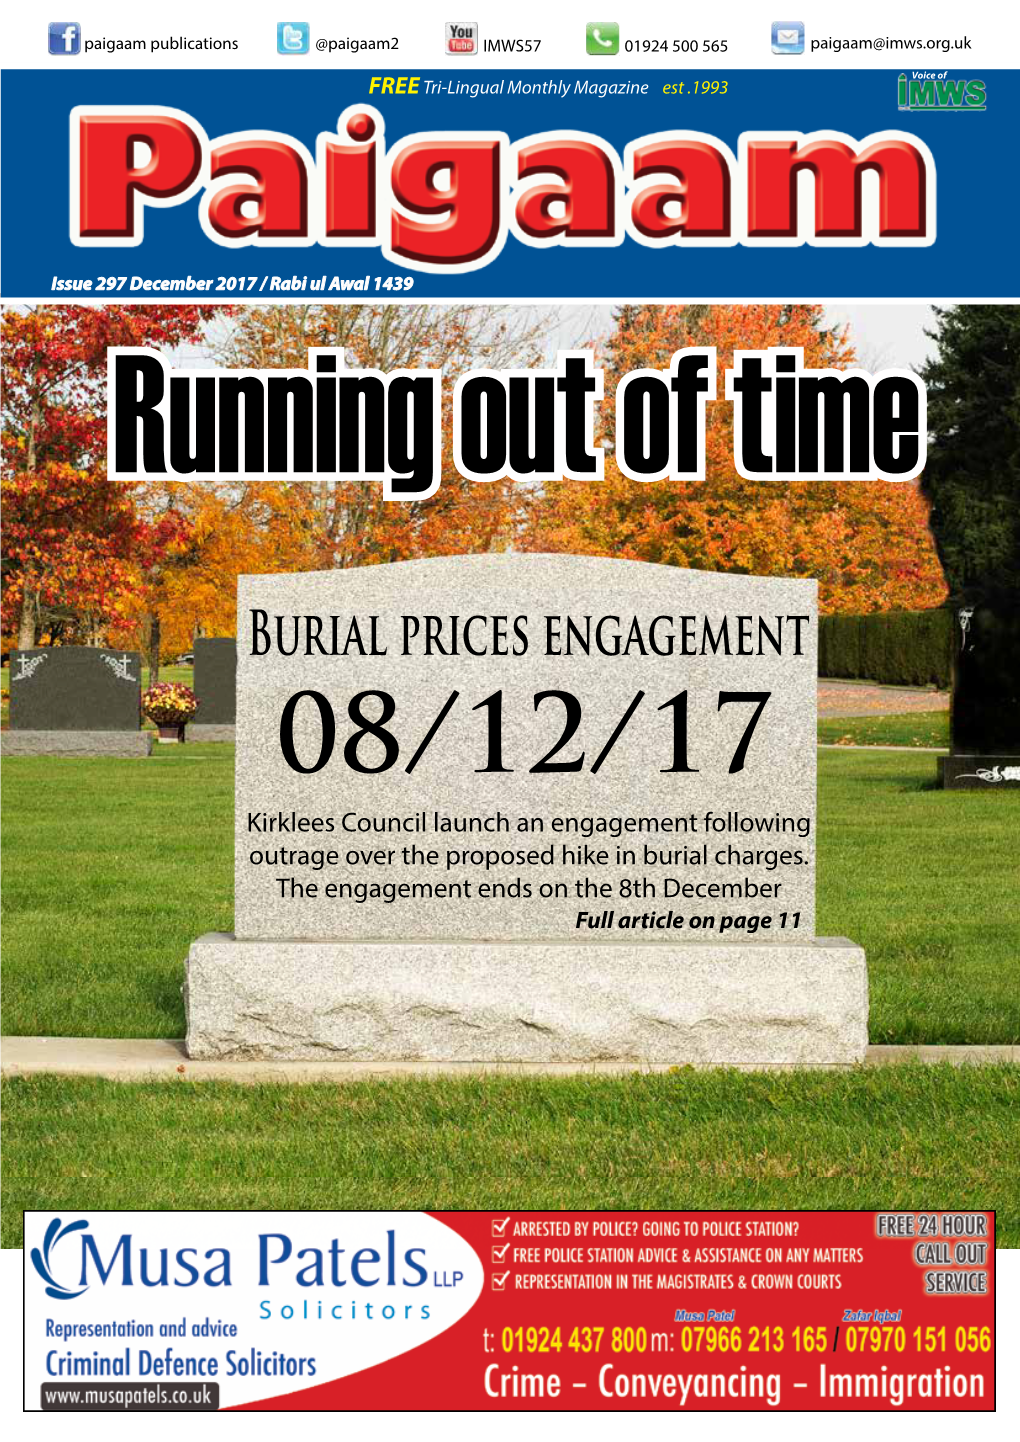 Burial Prices Engagement 08/12/17 Kirklees Council Launch an Engagement Following Outrage Over the Proposed Hike in Burial Charges